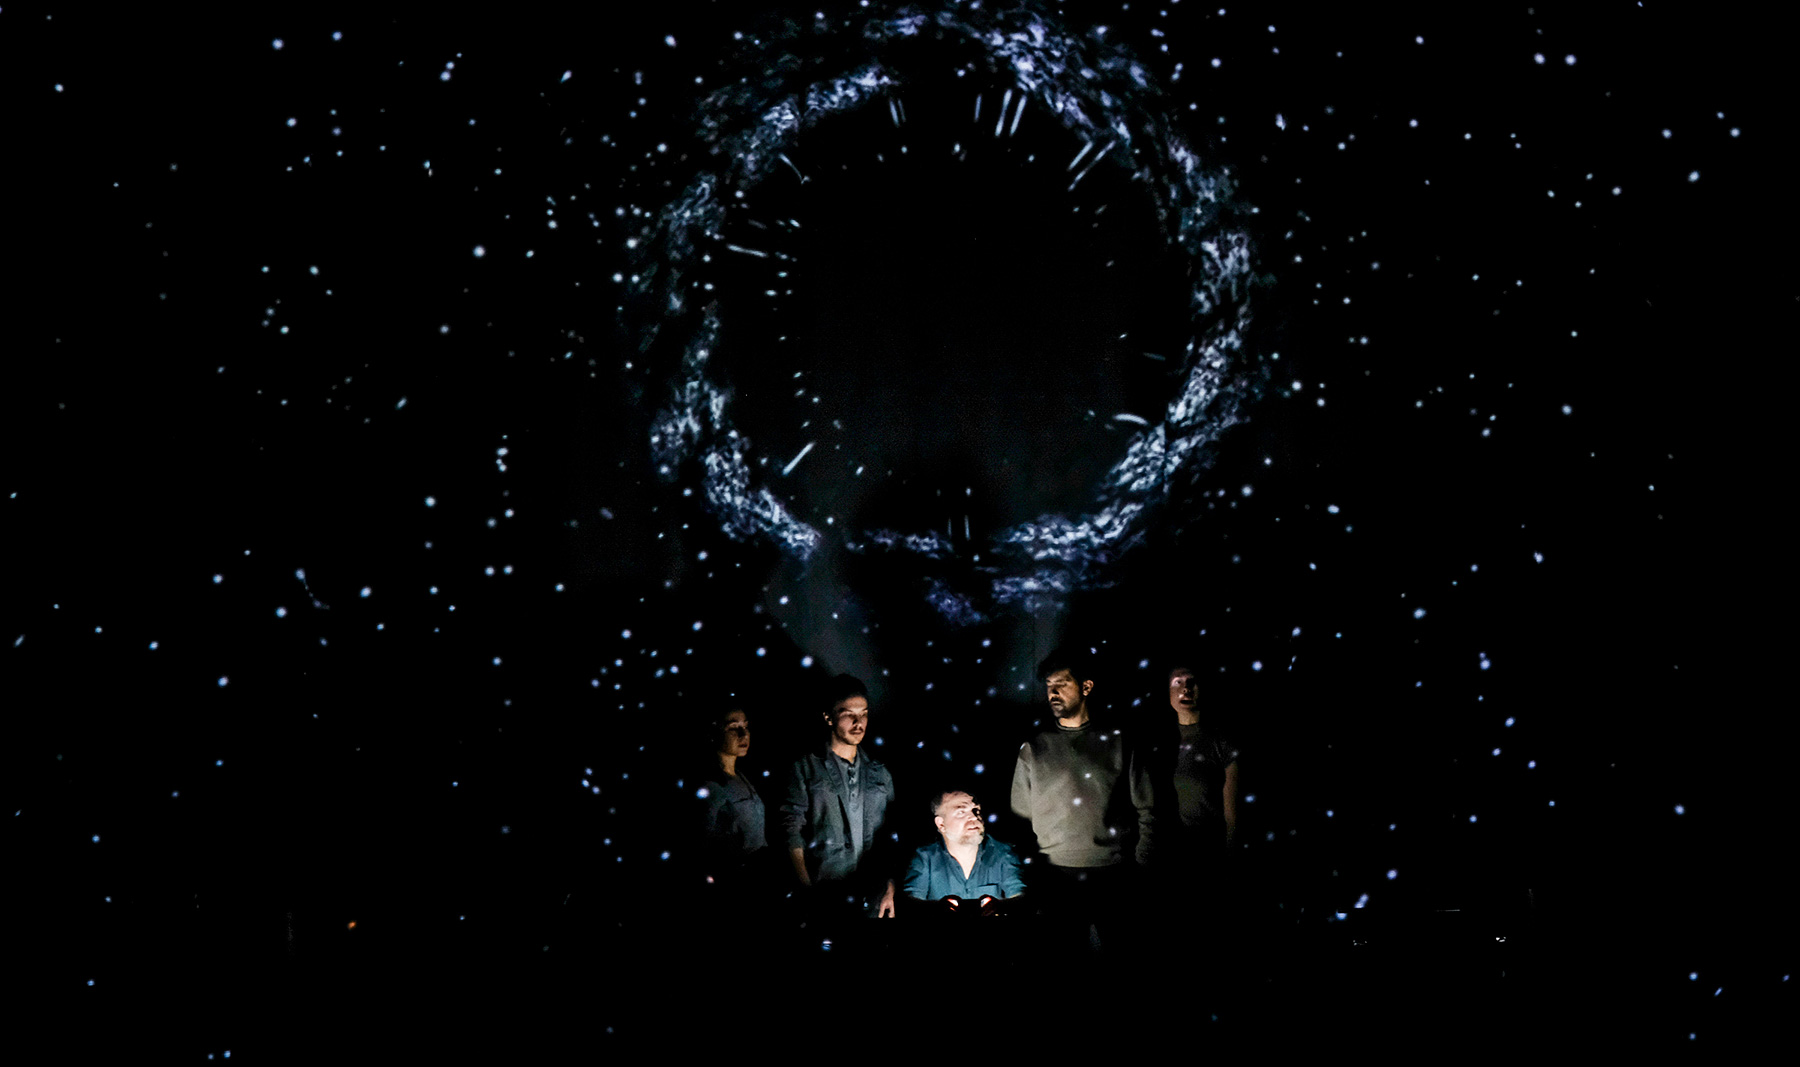 Photo of a group of people in shadow on a dark stage. Projected above them is a circle of light and scattered stars.